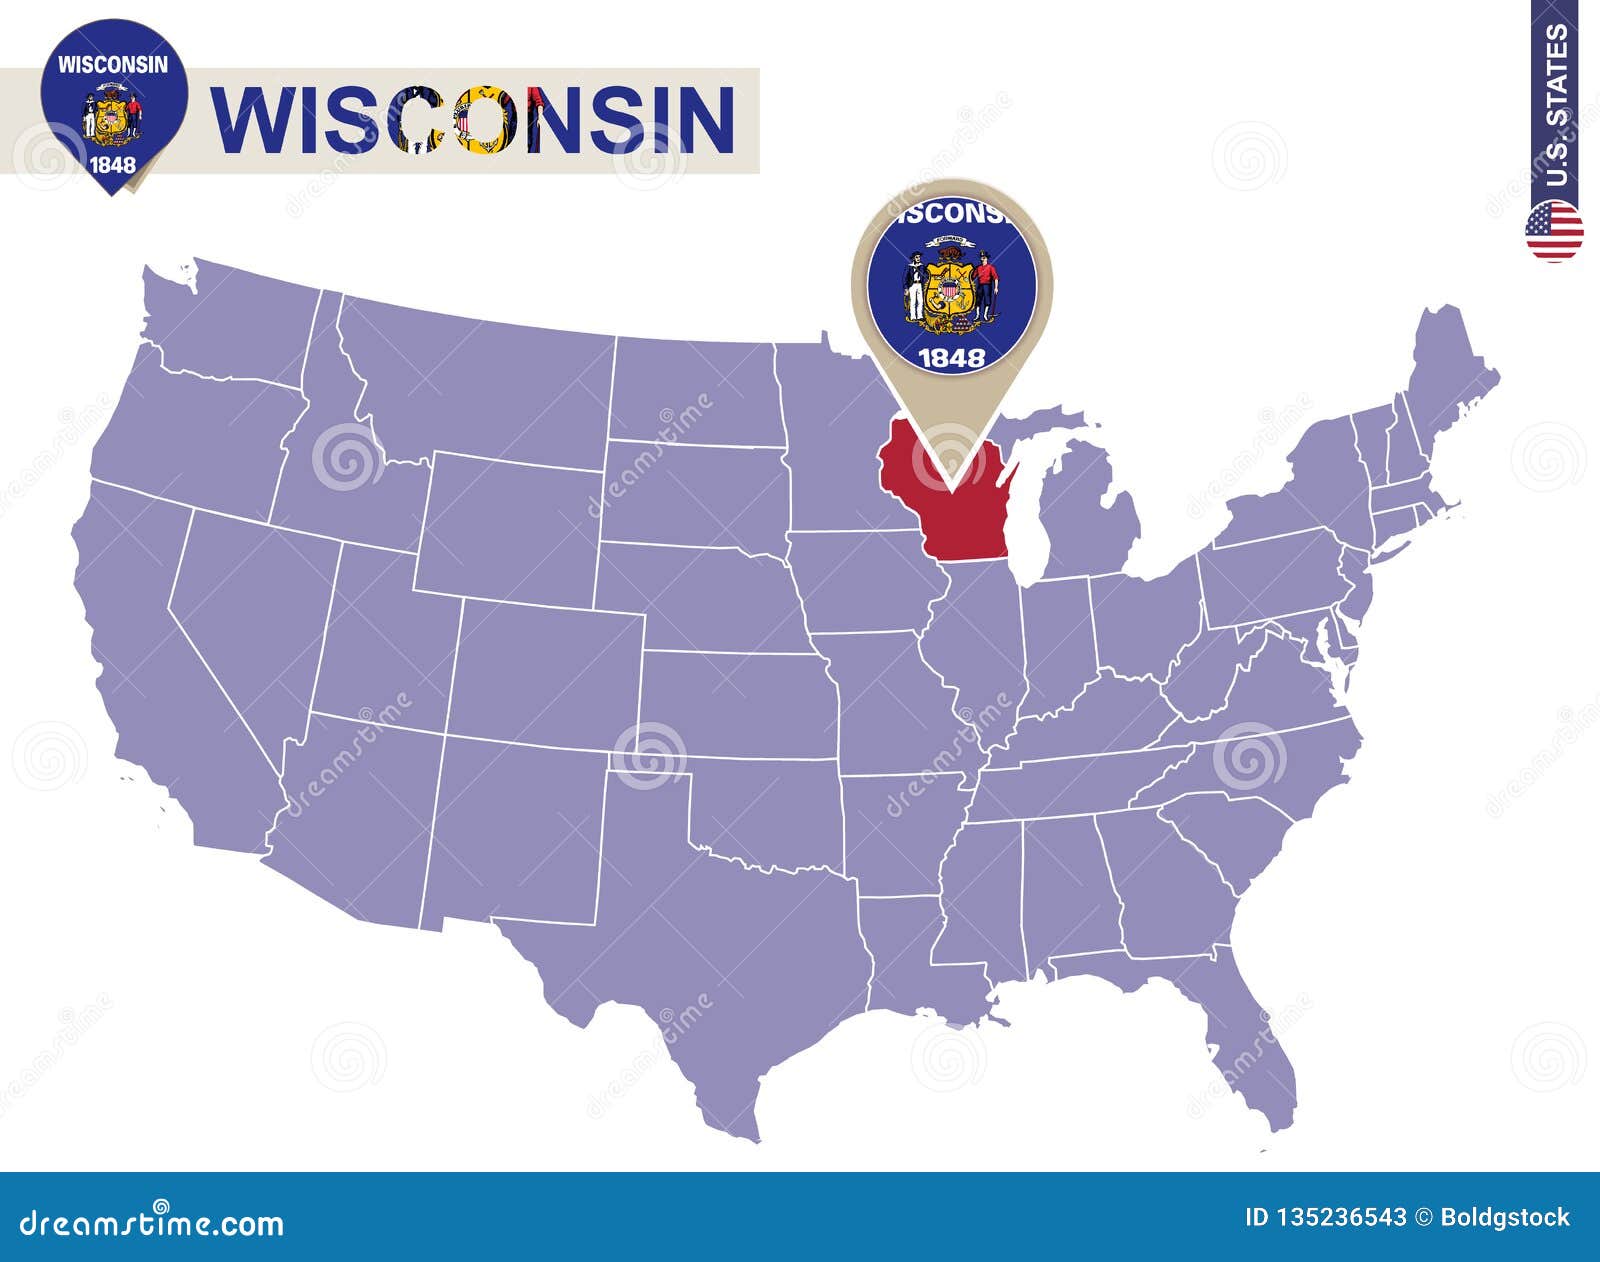 Wisconsin State On Usa Map Wisconsin Flag And Map Stock Vector